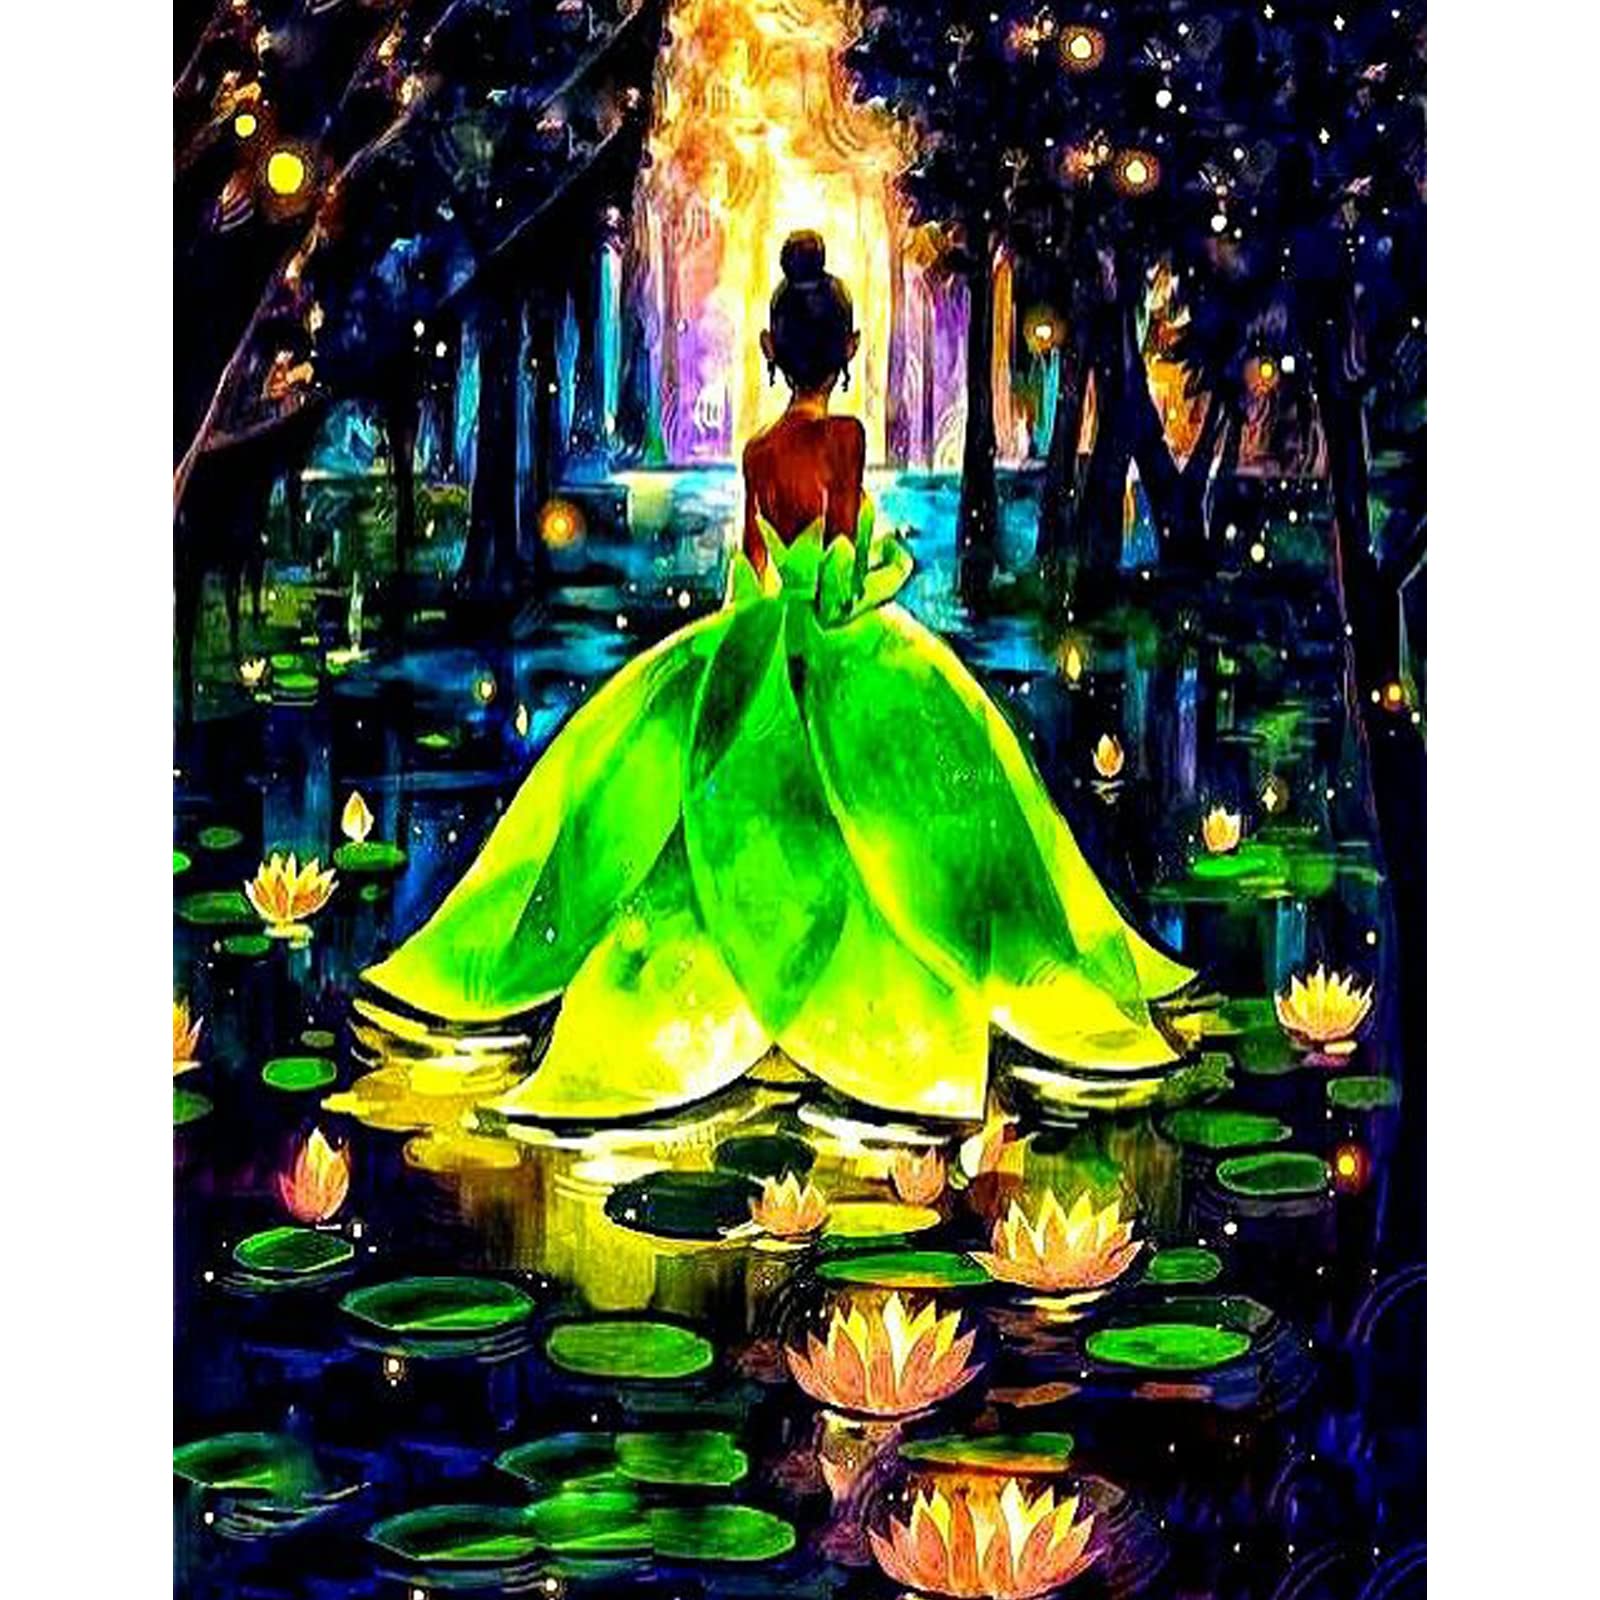 Stitch Diamond Painting Kits for Adults Kids Diamond Art with Crystal Rhinestone Full Drill 5D DIY Diamond Painting Picture Perfect for Home Wall